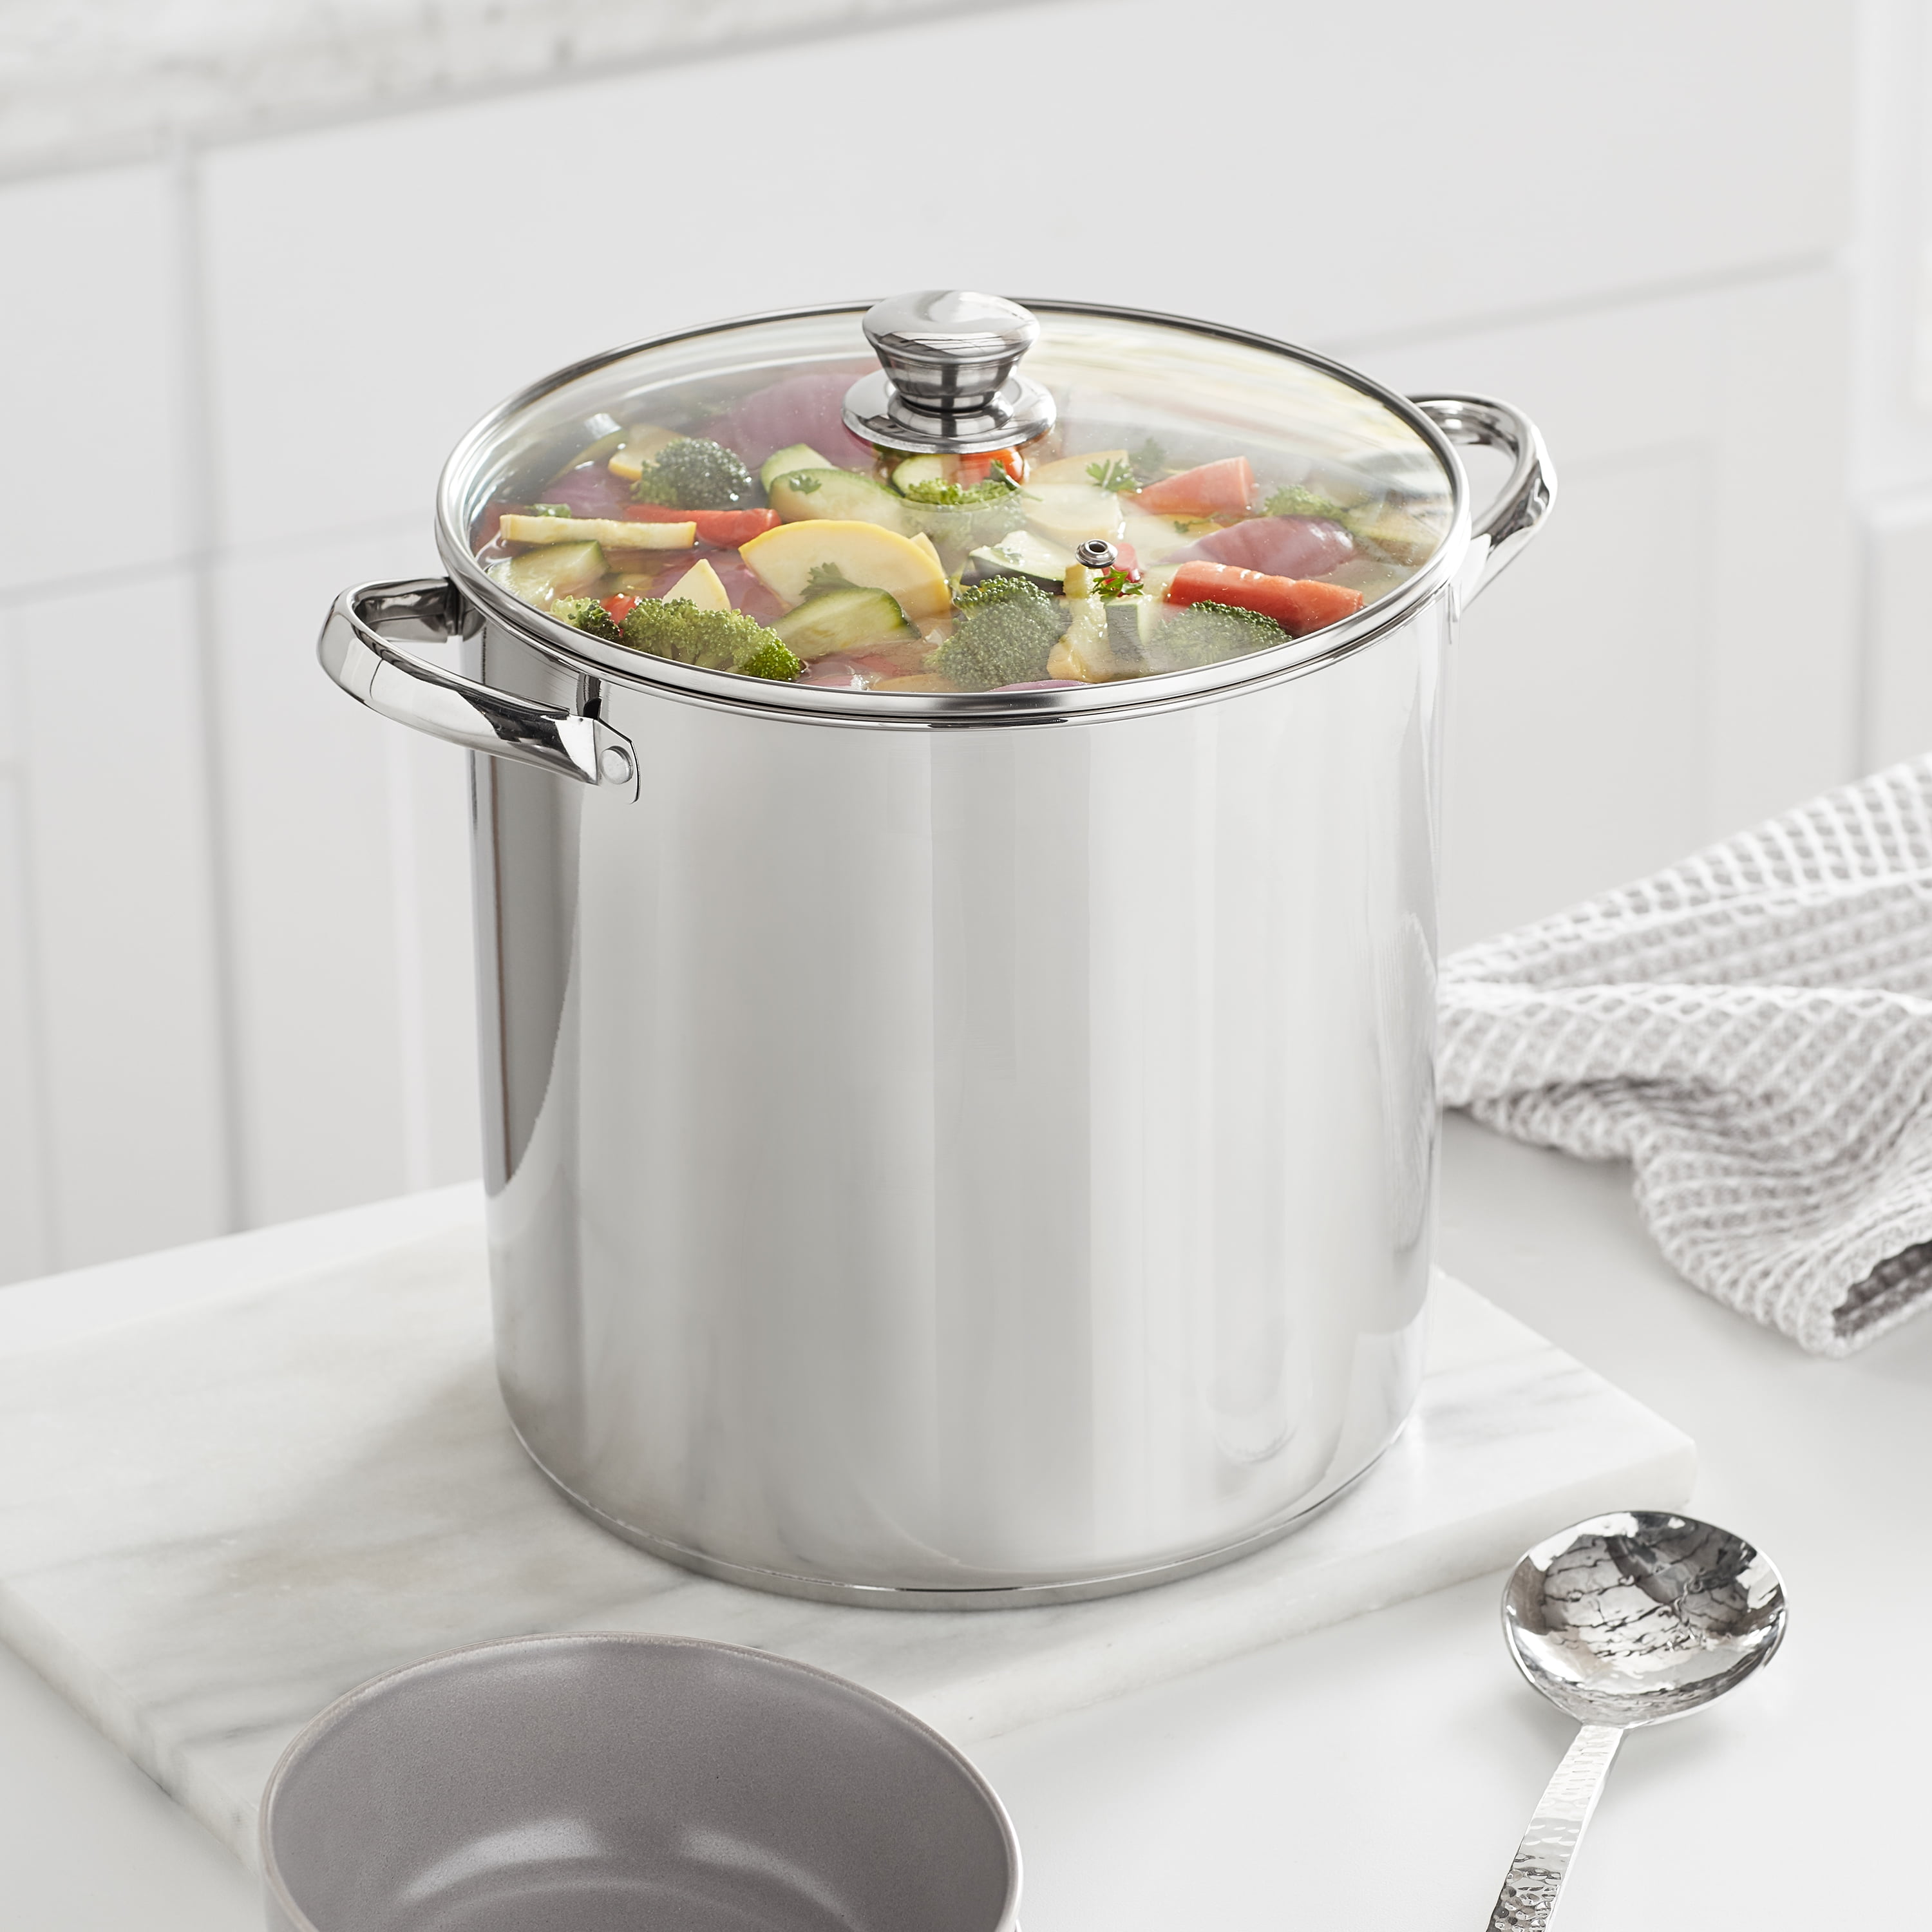 Elegant Large Steel Stock Pot with Lid Cookware Kitchen Cooking 12-Quart